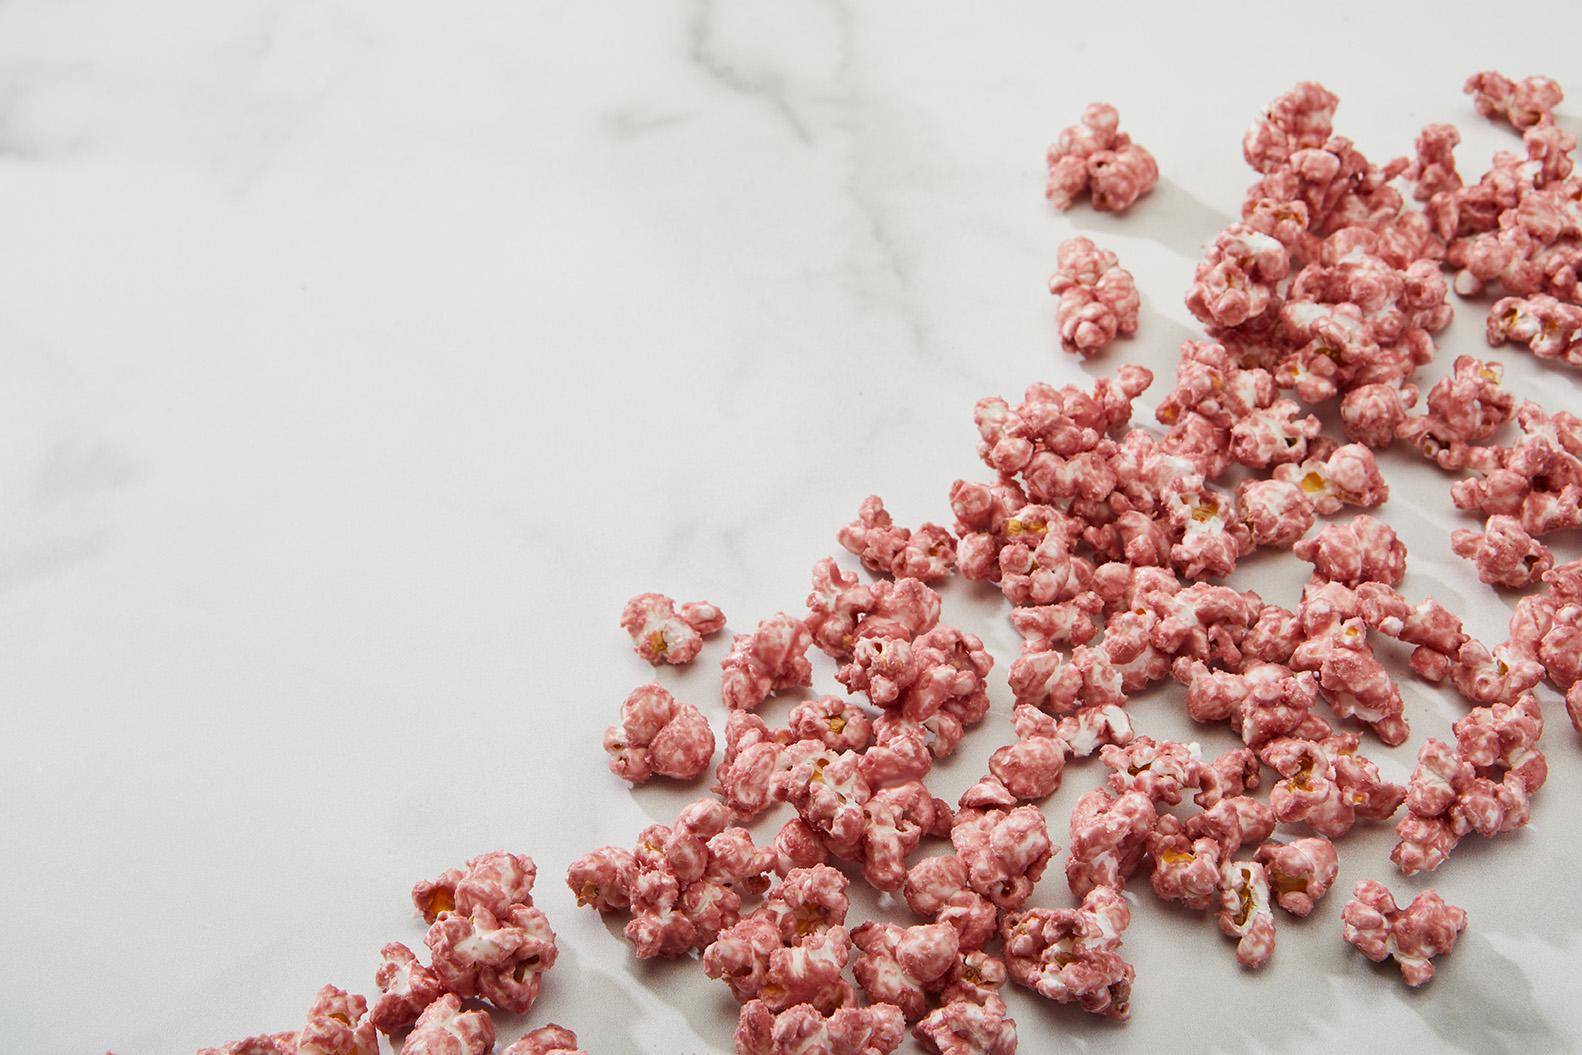 Download Ruby Chocolate Coated Popcorn Recipe